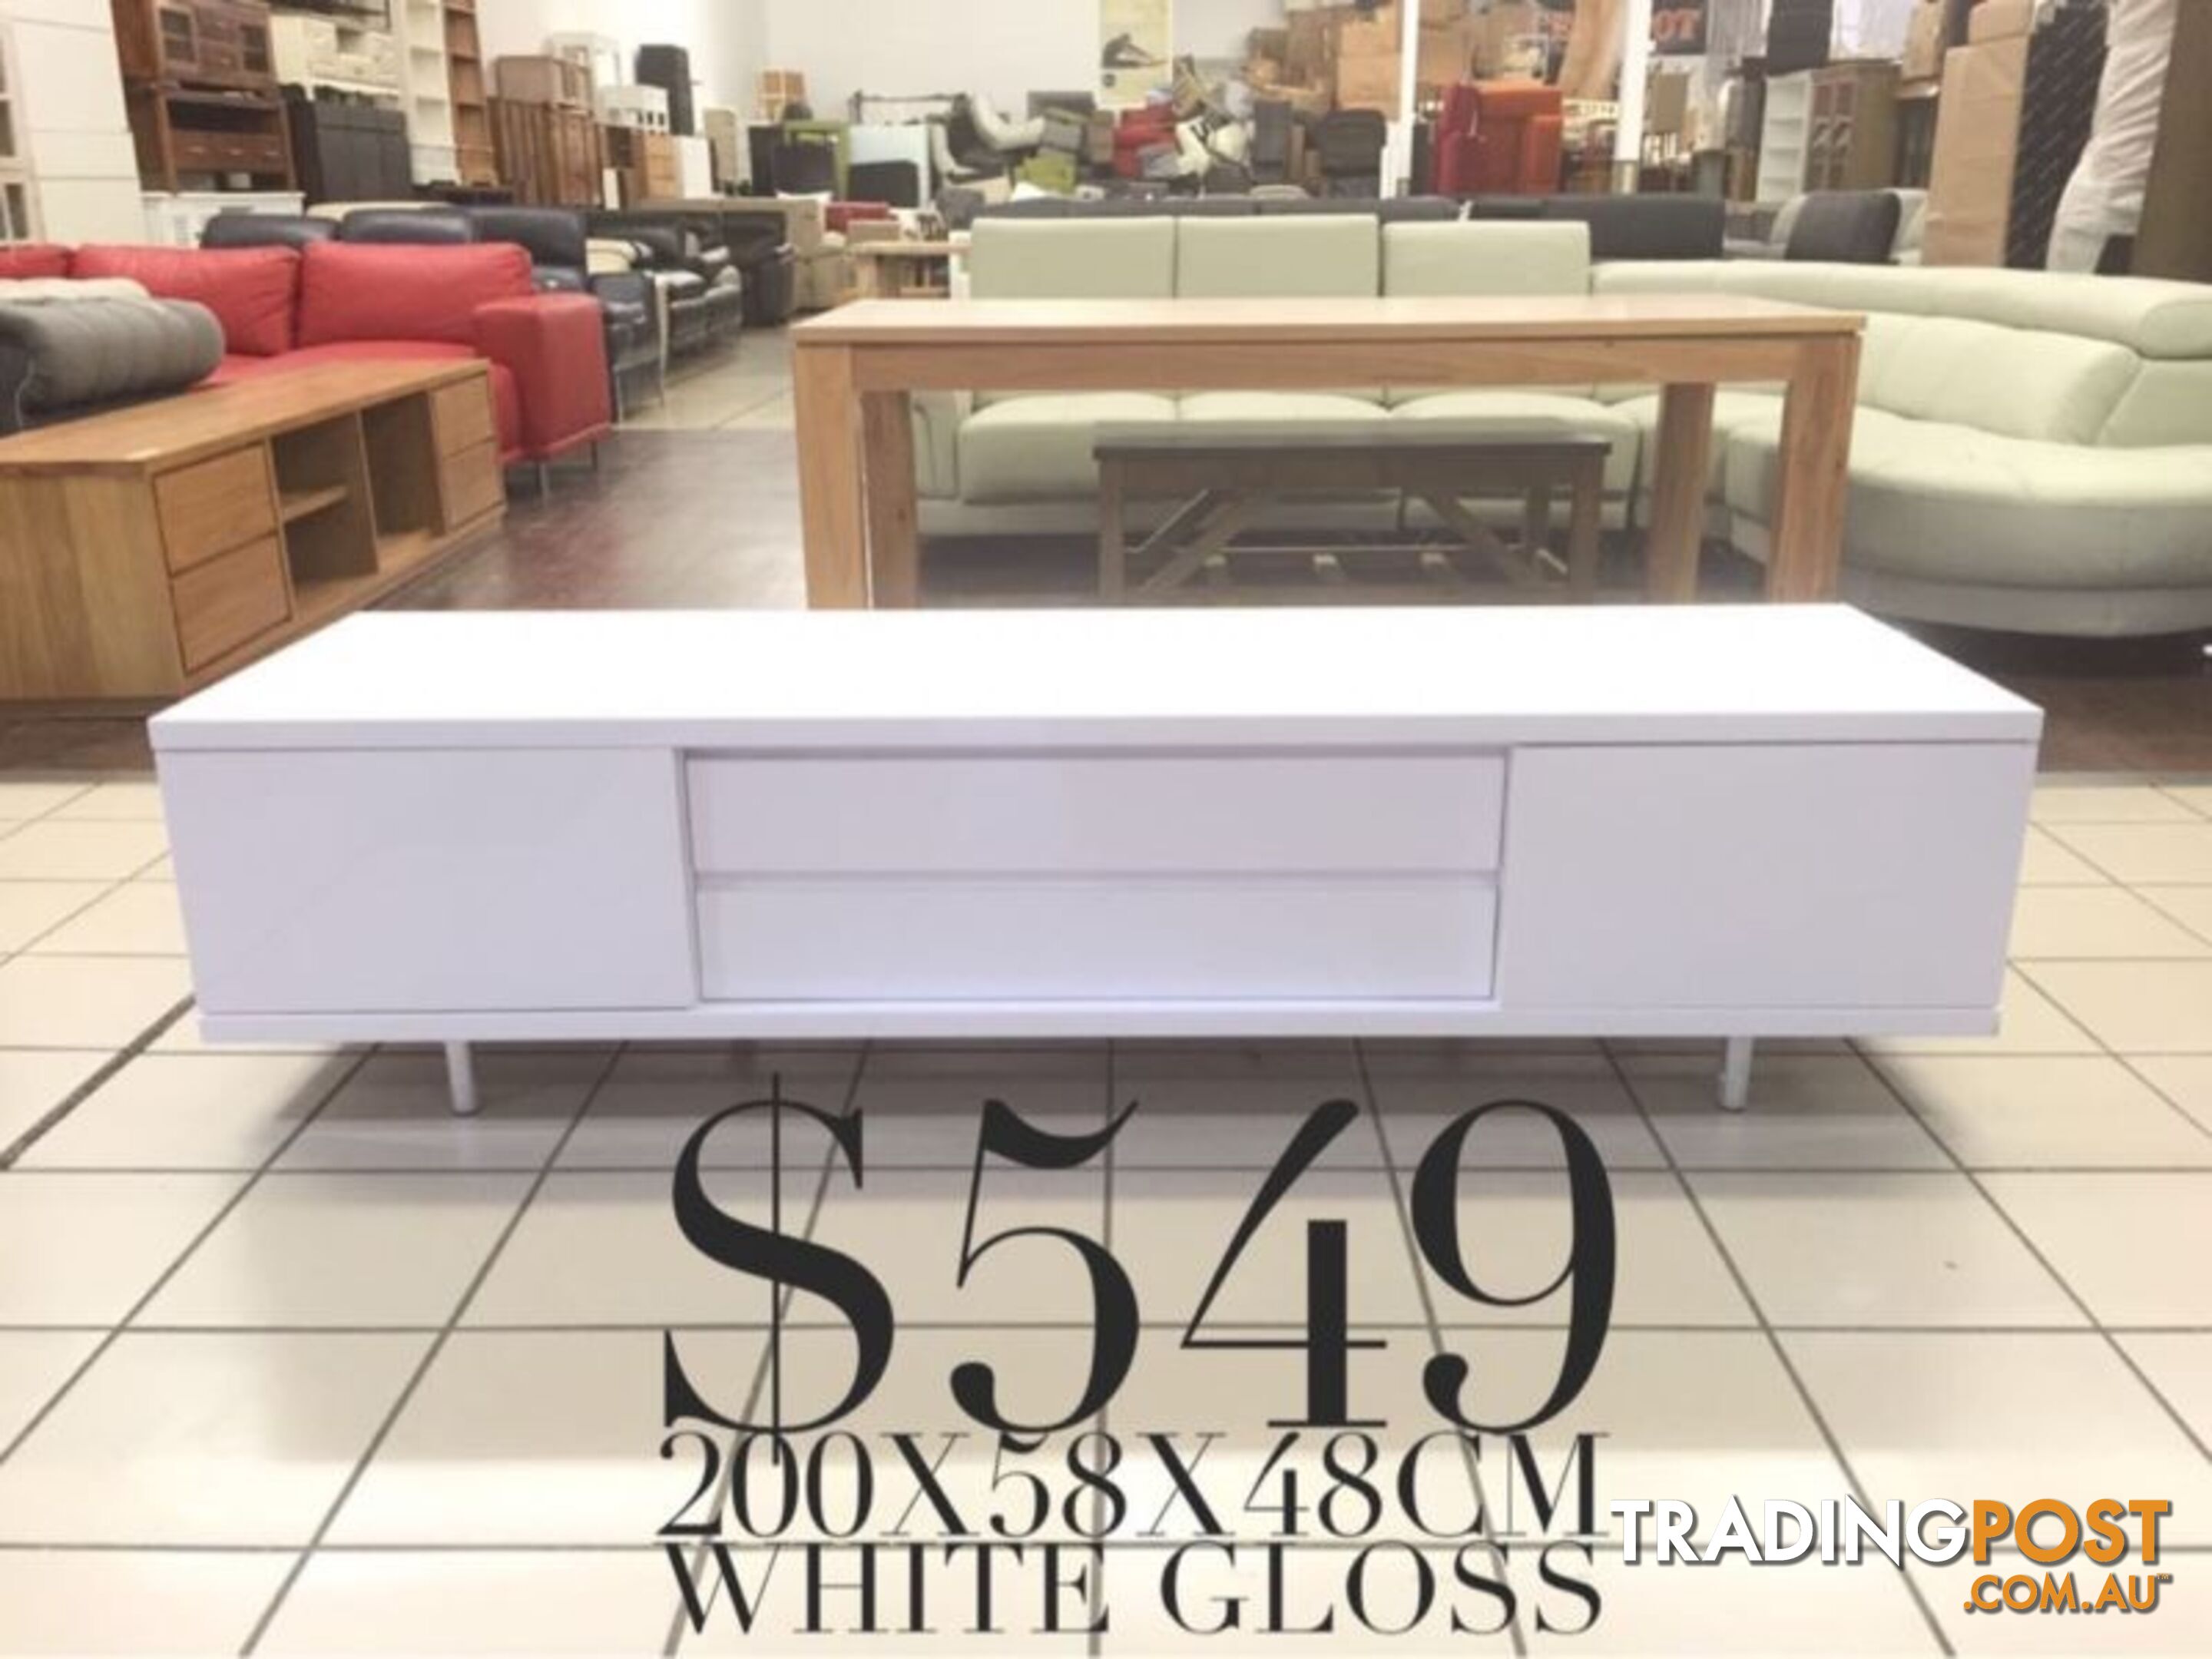 BRAND NEW & FACTORY SECOND TV UNITS CLEARANCE!